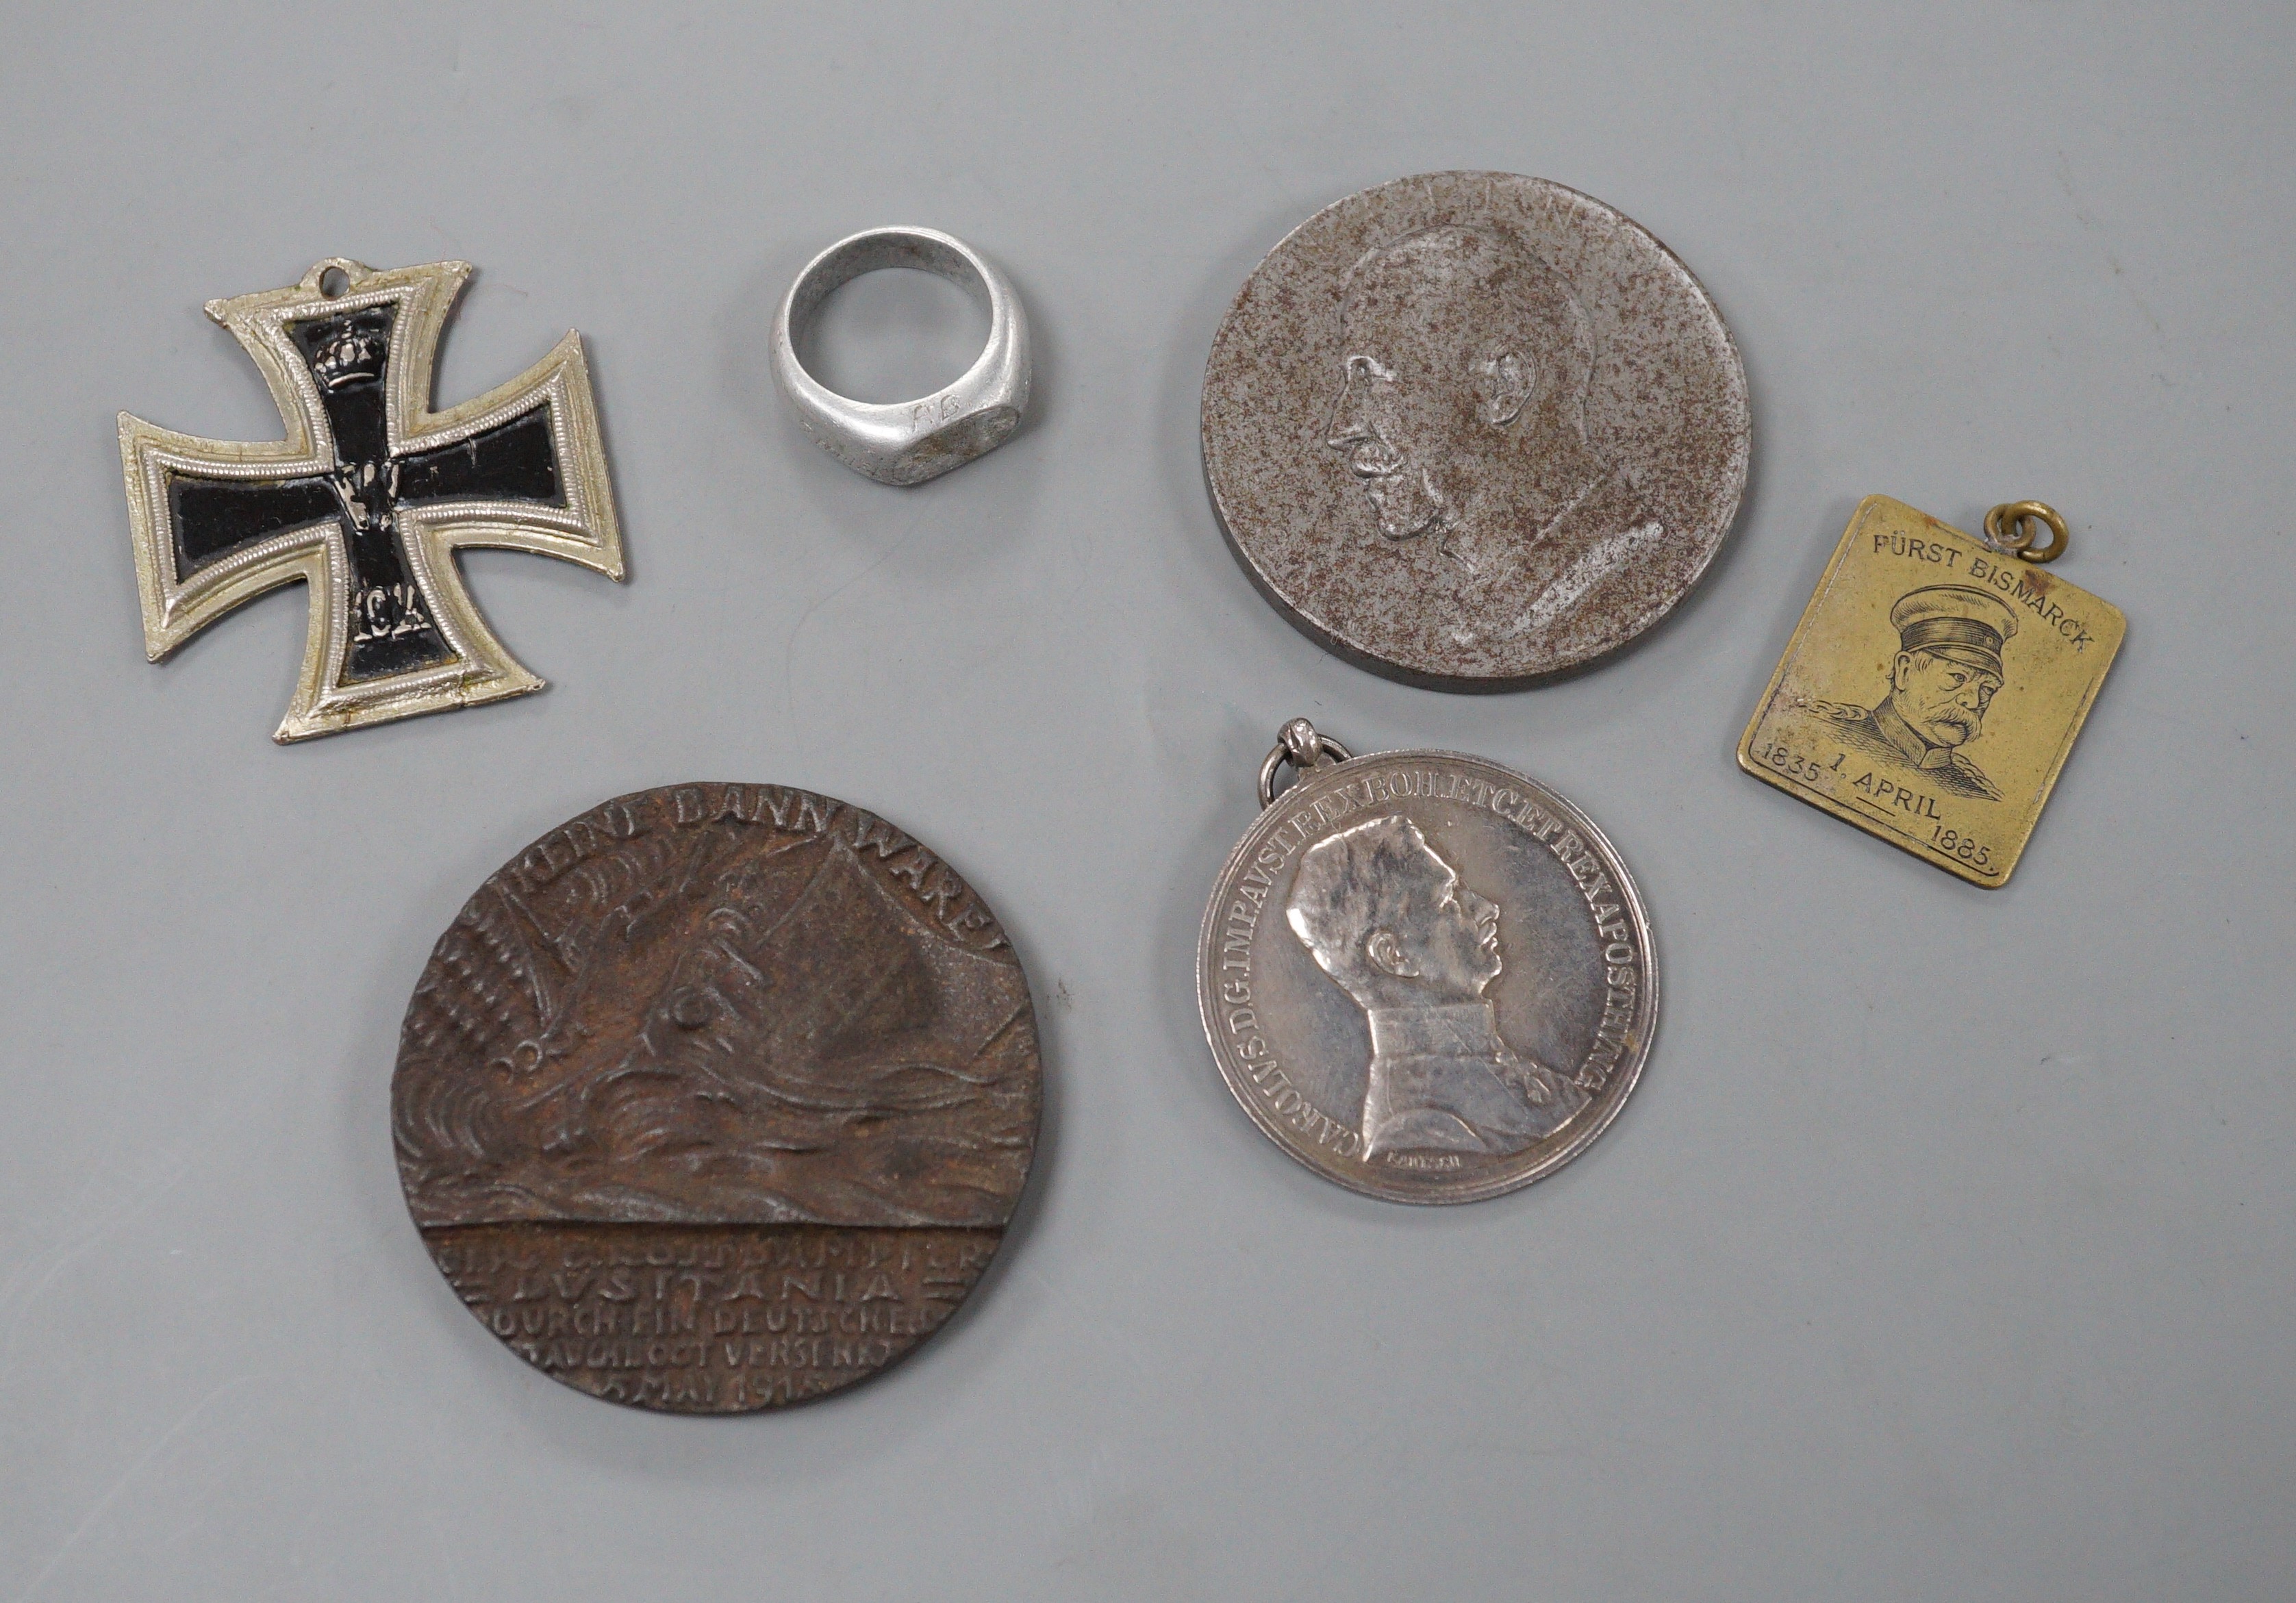 WWI German and Austrian medals, badges and objects, comprising a Zeppelin commemorative aluminium ring, engraved ‘ZEPP L31 OCT. 1916, made from the wreck of Zeppelin LZ31 which was destroyed on the 16th of September 1916